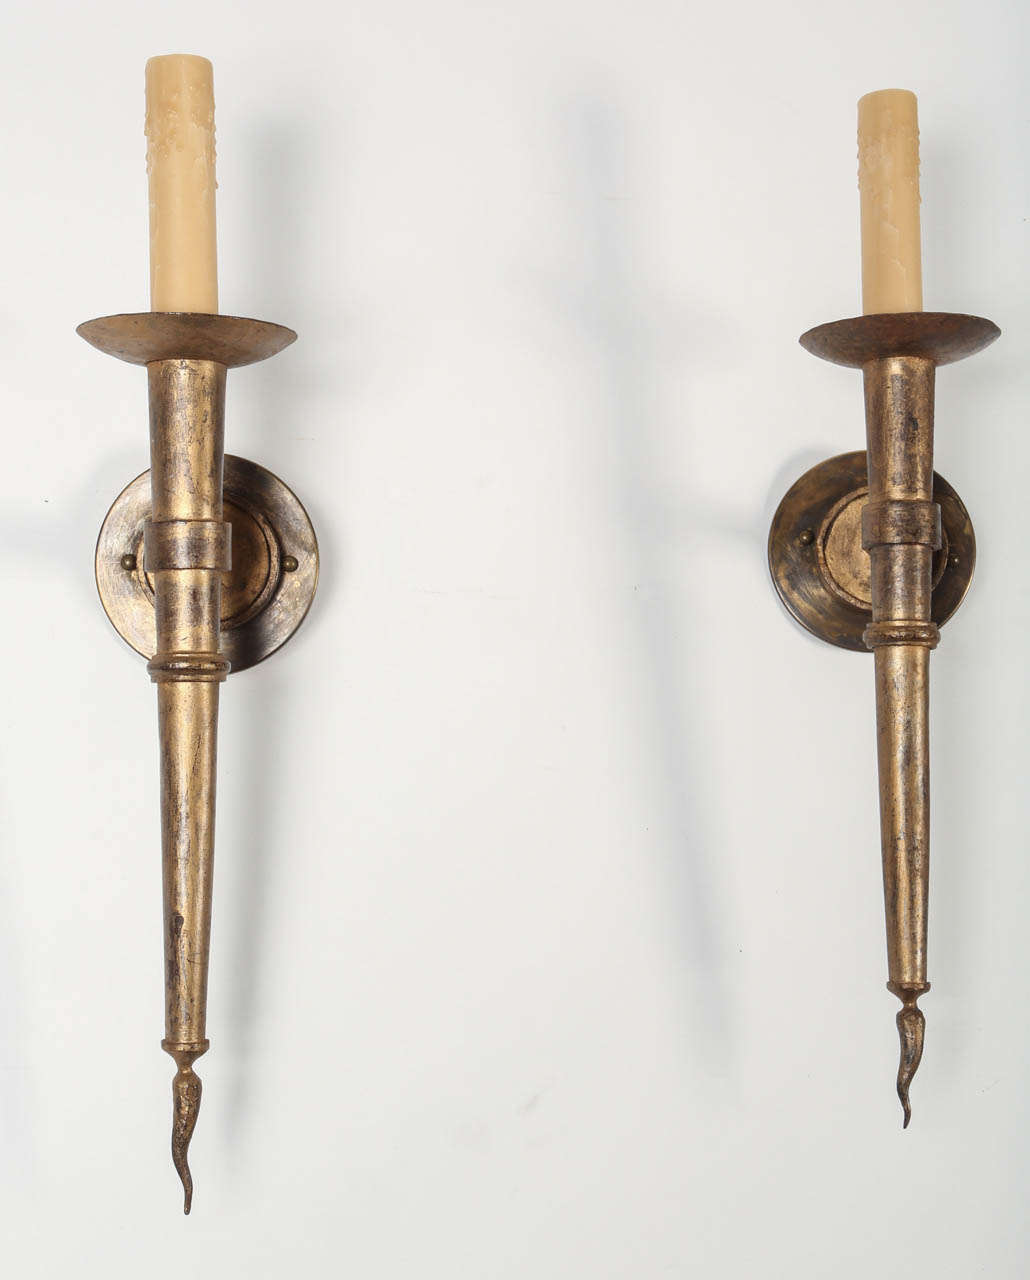 This elegant pair of French gilded iron wall sconces from the 1940's have a classic torchiere design. Their simplicity allows them to work in a variety of spaces, perfect flanking a fireplace or in a hallway. 

Base measures 5